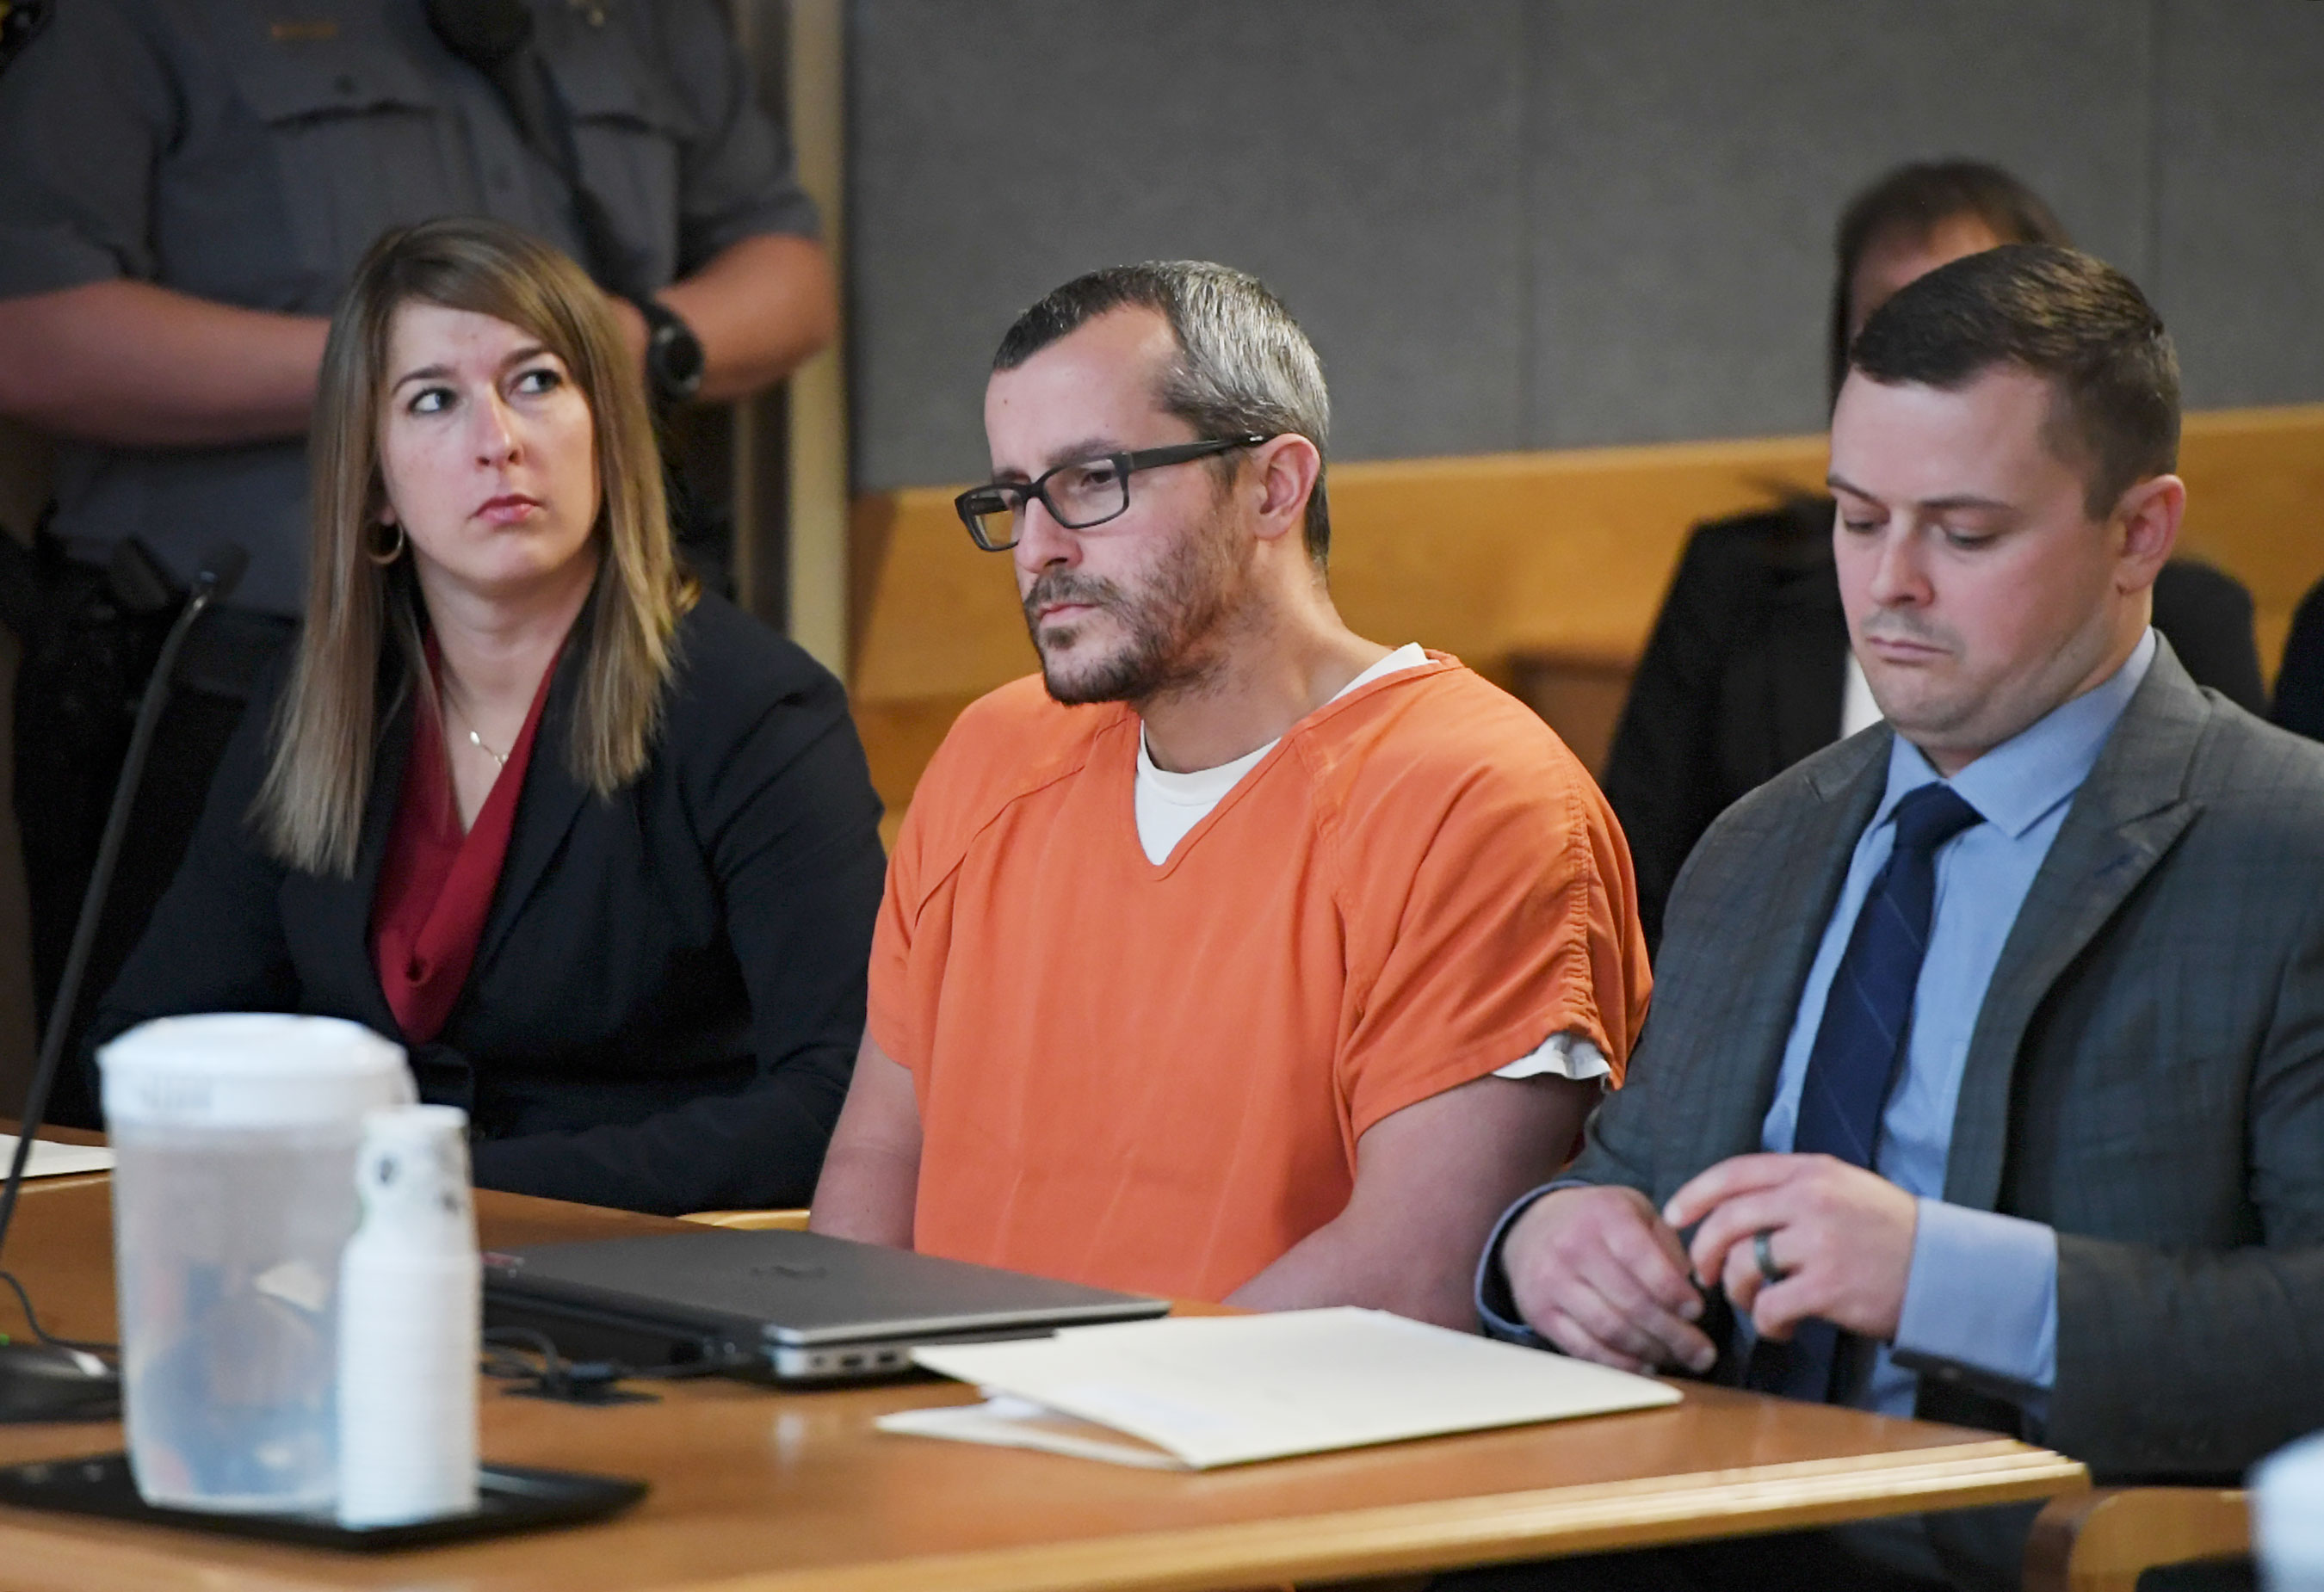 GREELEY CO - NOVEMBER 19: Christopher Watts sits in court for his sentencing hearing at the Weld County Courthouse on November 19, 2018 in Greeley, Colorado. Watts was sentenced to life in prison for murdering his pregnant wife, daughters. (Photo by RJ Sangosti/The Denver Post via Getty Images)